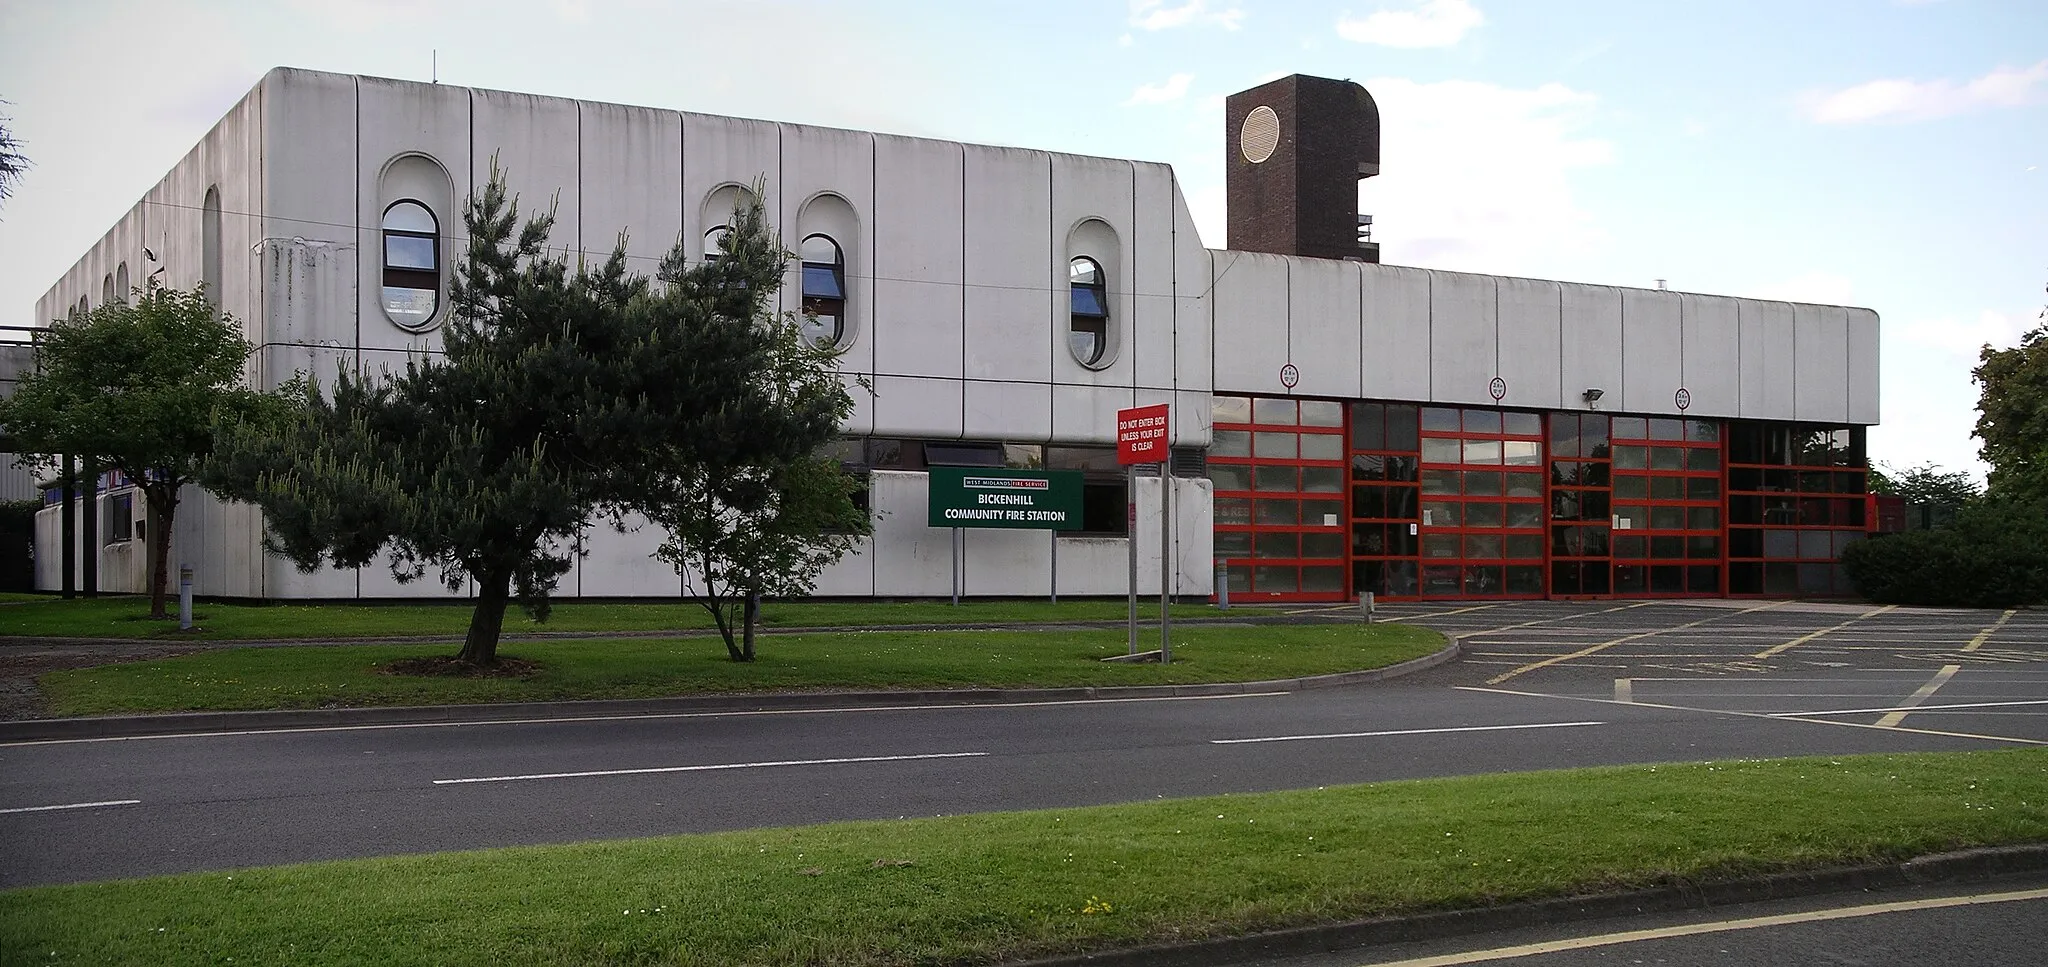 Photo showing: Bickenhill Community Fire Station, West Midlands, England (this image is two photographs stitched).